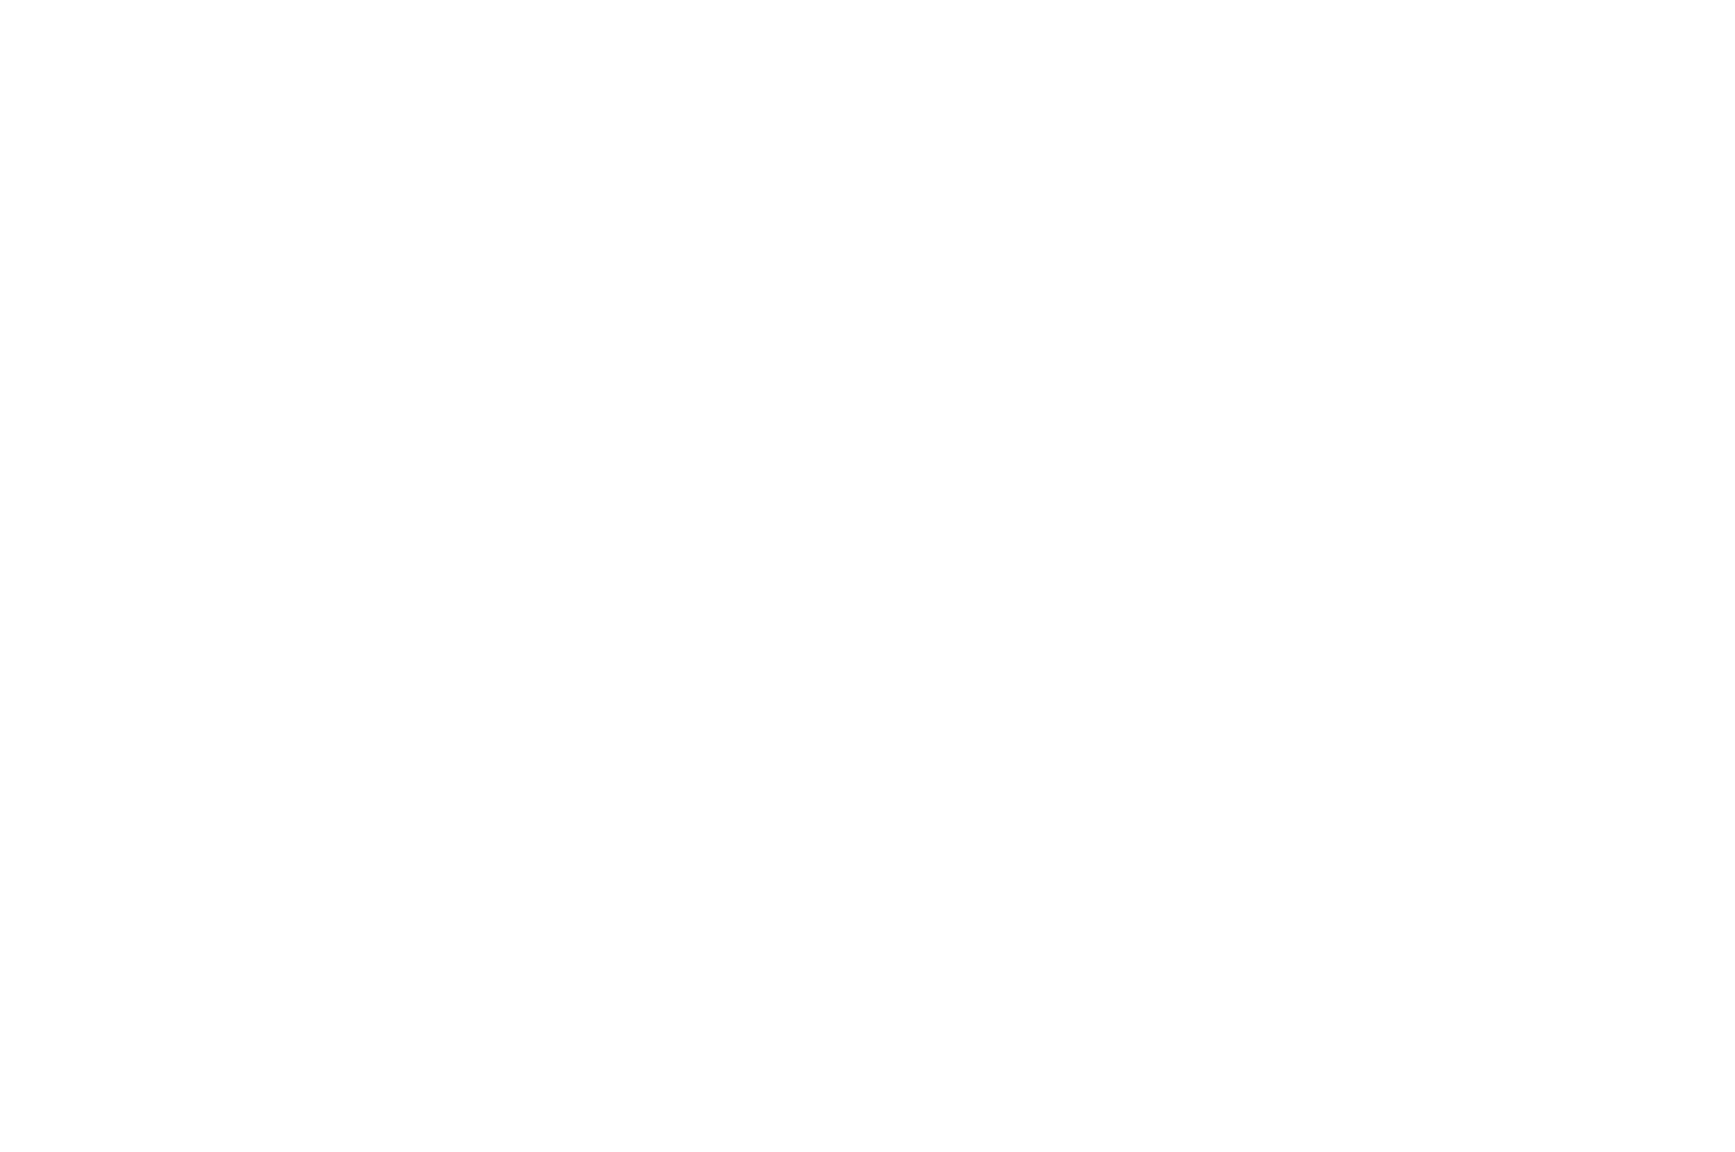 OFFICIAL SELECTION - Jersey Shore Film Festival - 2021-3.png